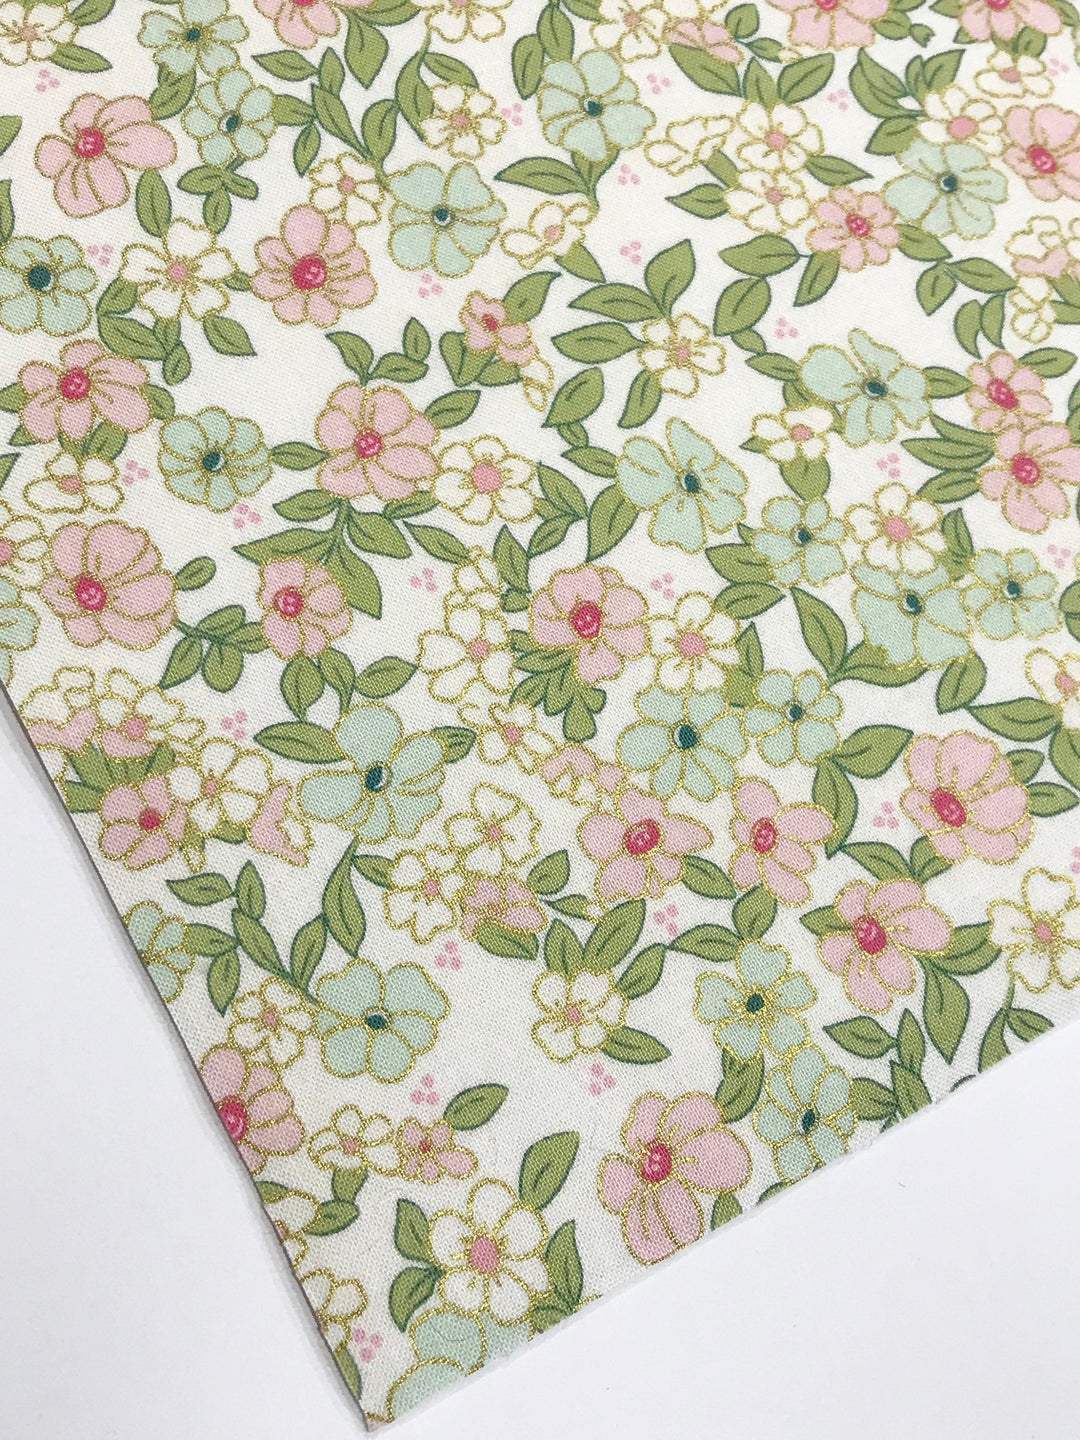 Mint and Pink with Gold Metallic Floral Felt Backed Fabric Sheets